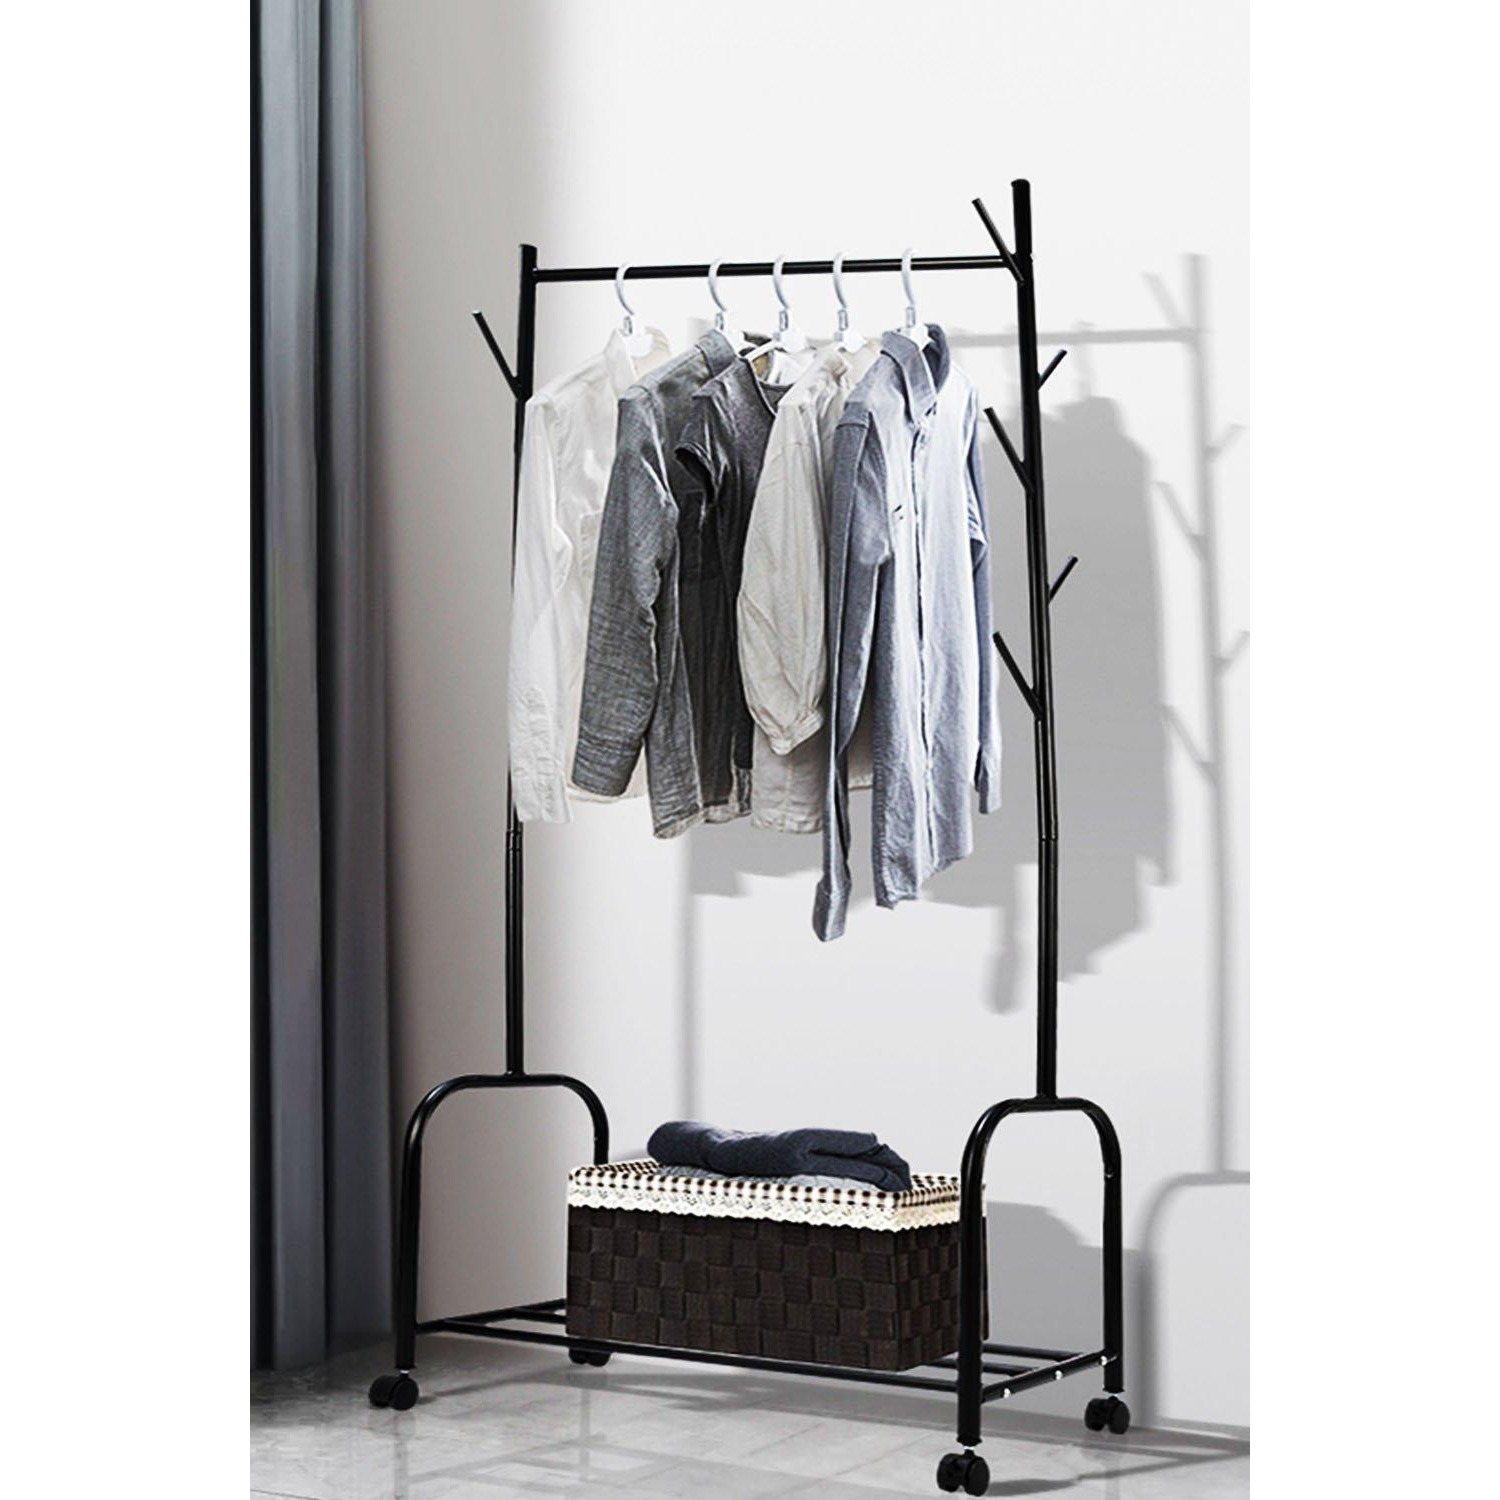 100cm Single Rail Clothes Rail Hanging Display Stand - image 1